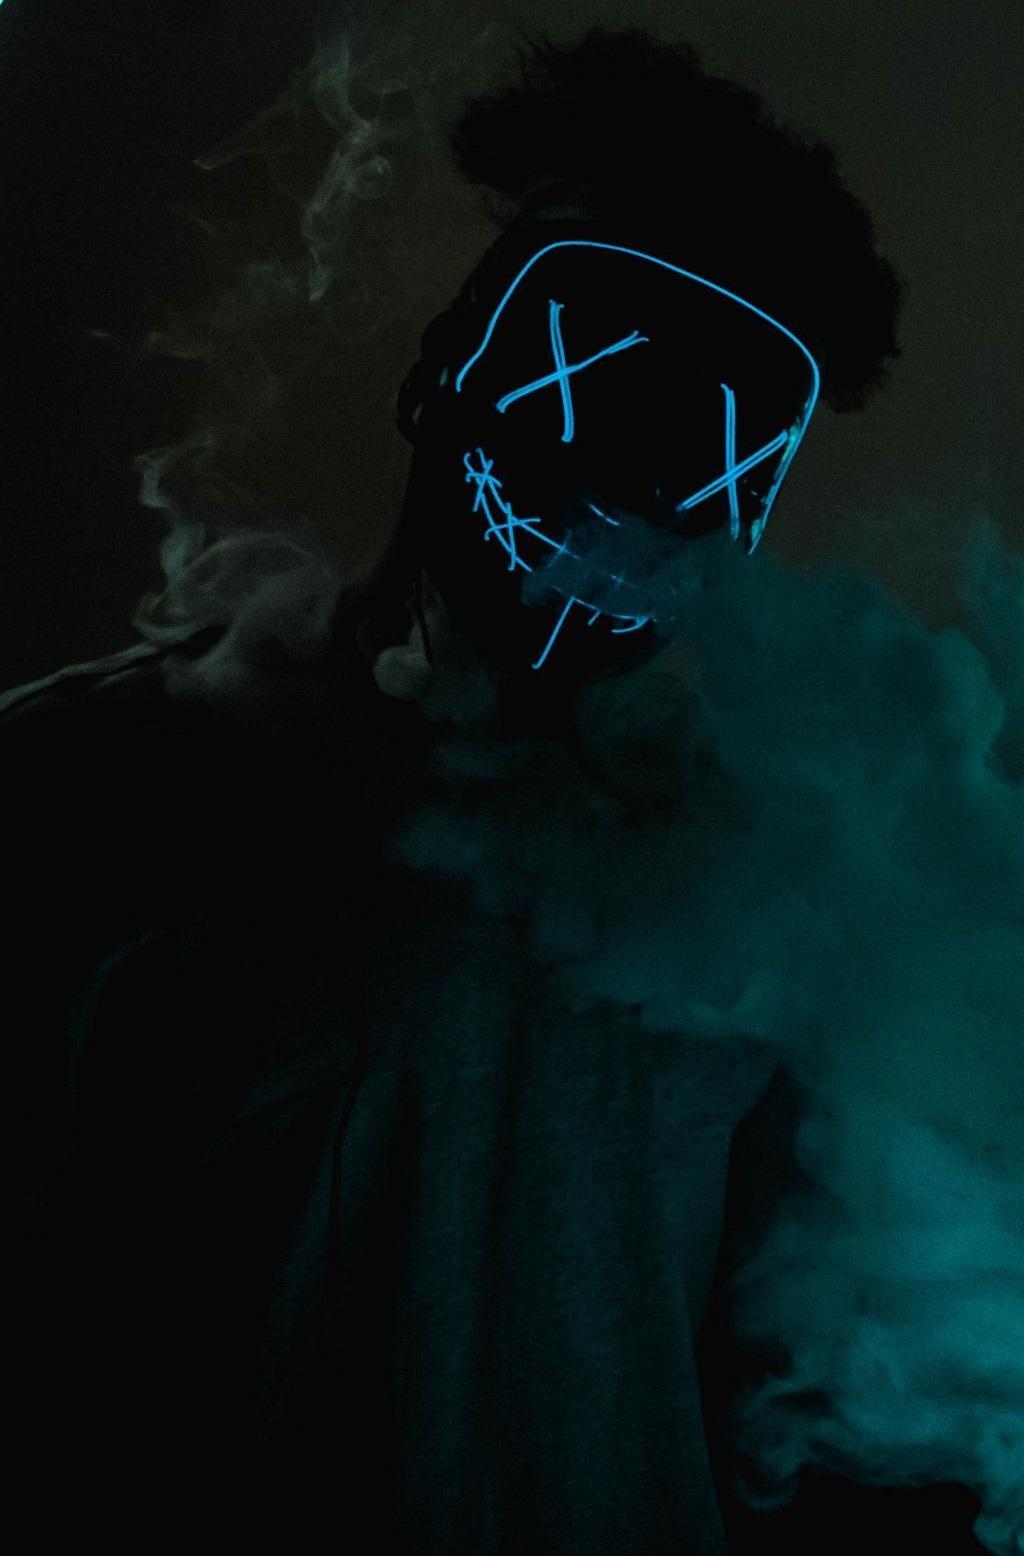 Led Purge Mask Wallpaper HD for Android